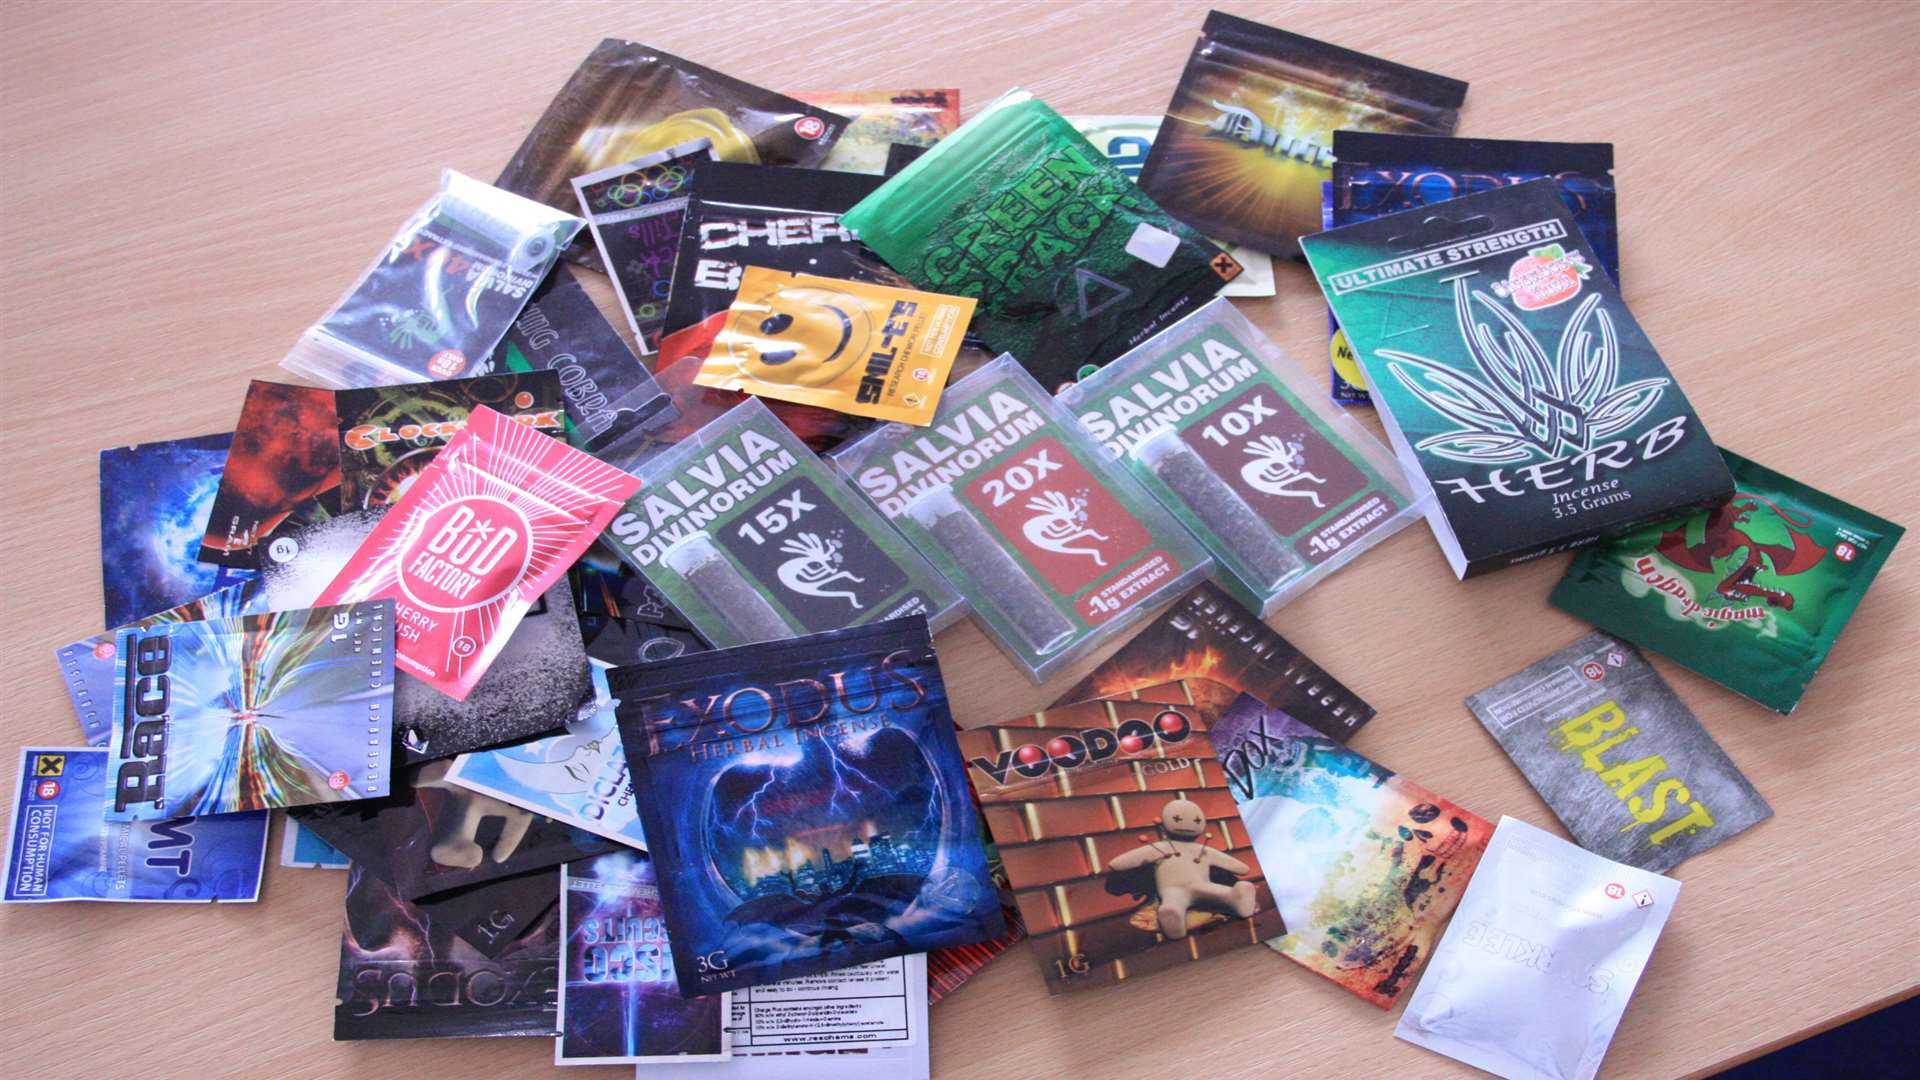 Some of the legal highs seized during the raids